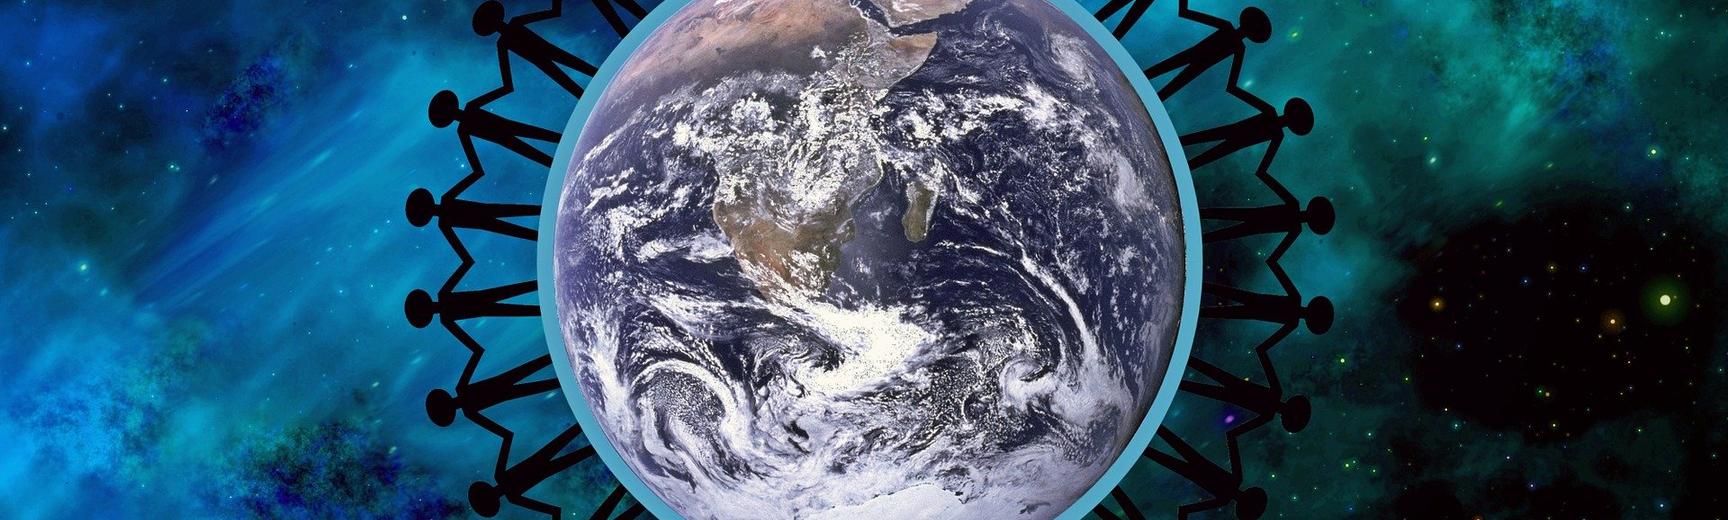 A circle of stick figures connecting hands stood on the earth as seen from space